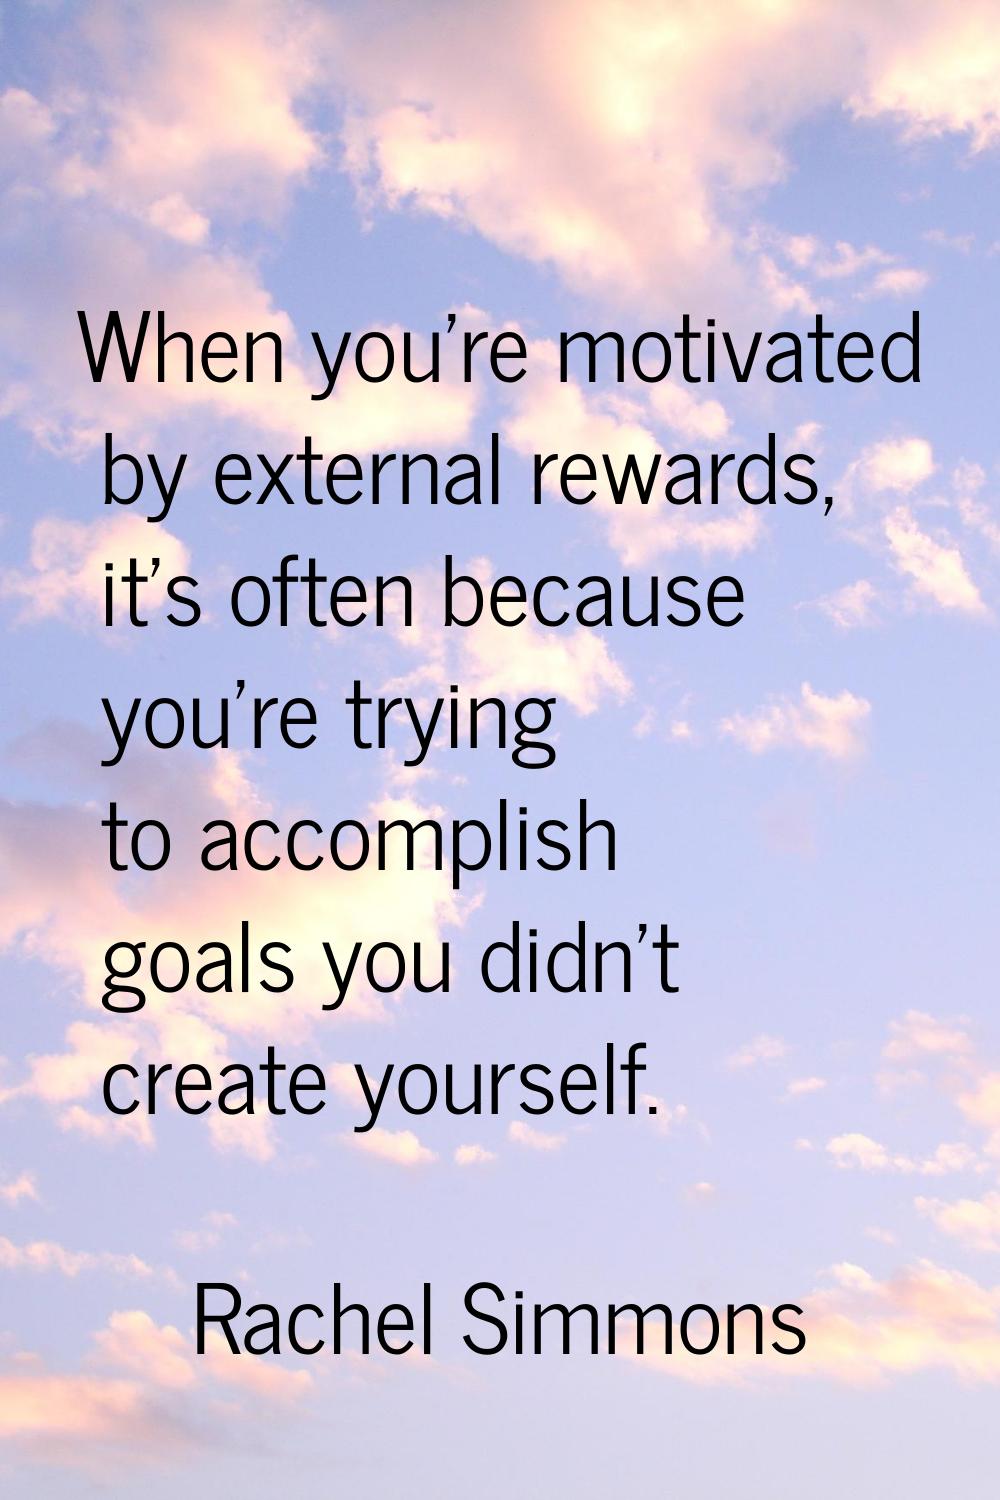 When you're motivated by external rewards, it's often because you're trying to accomplish goals you